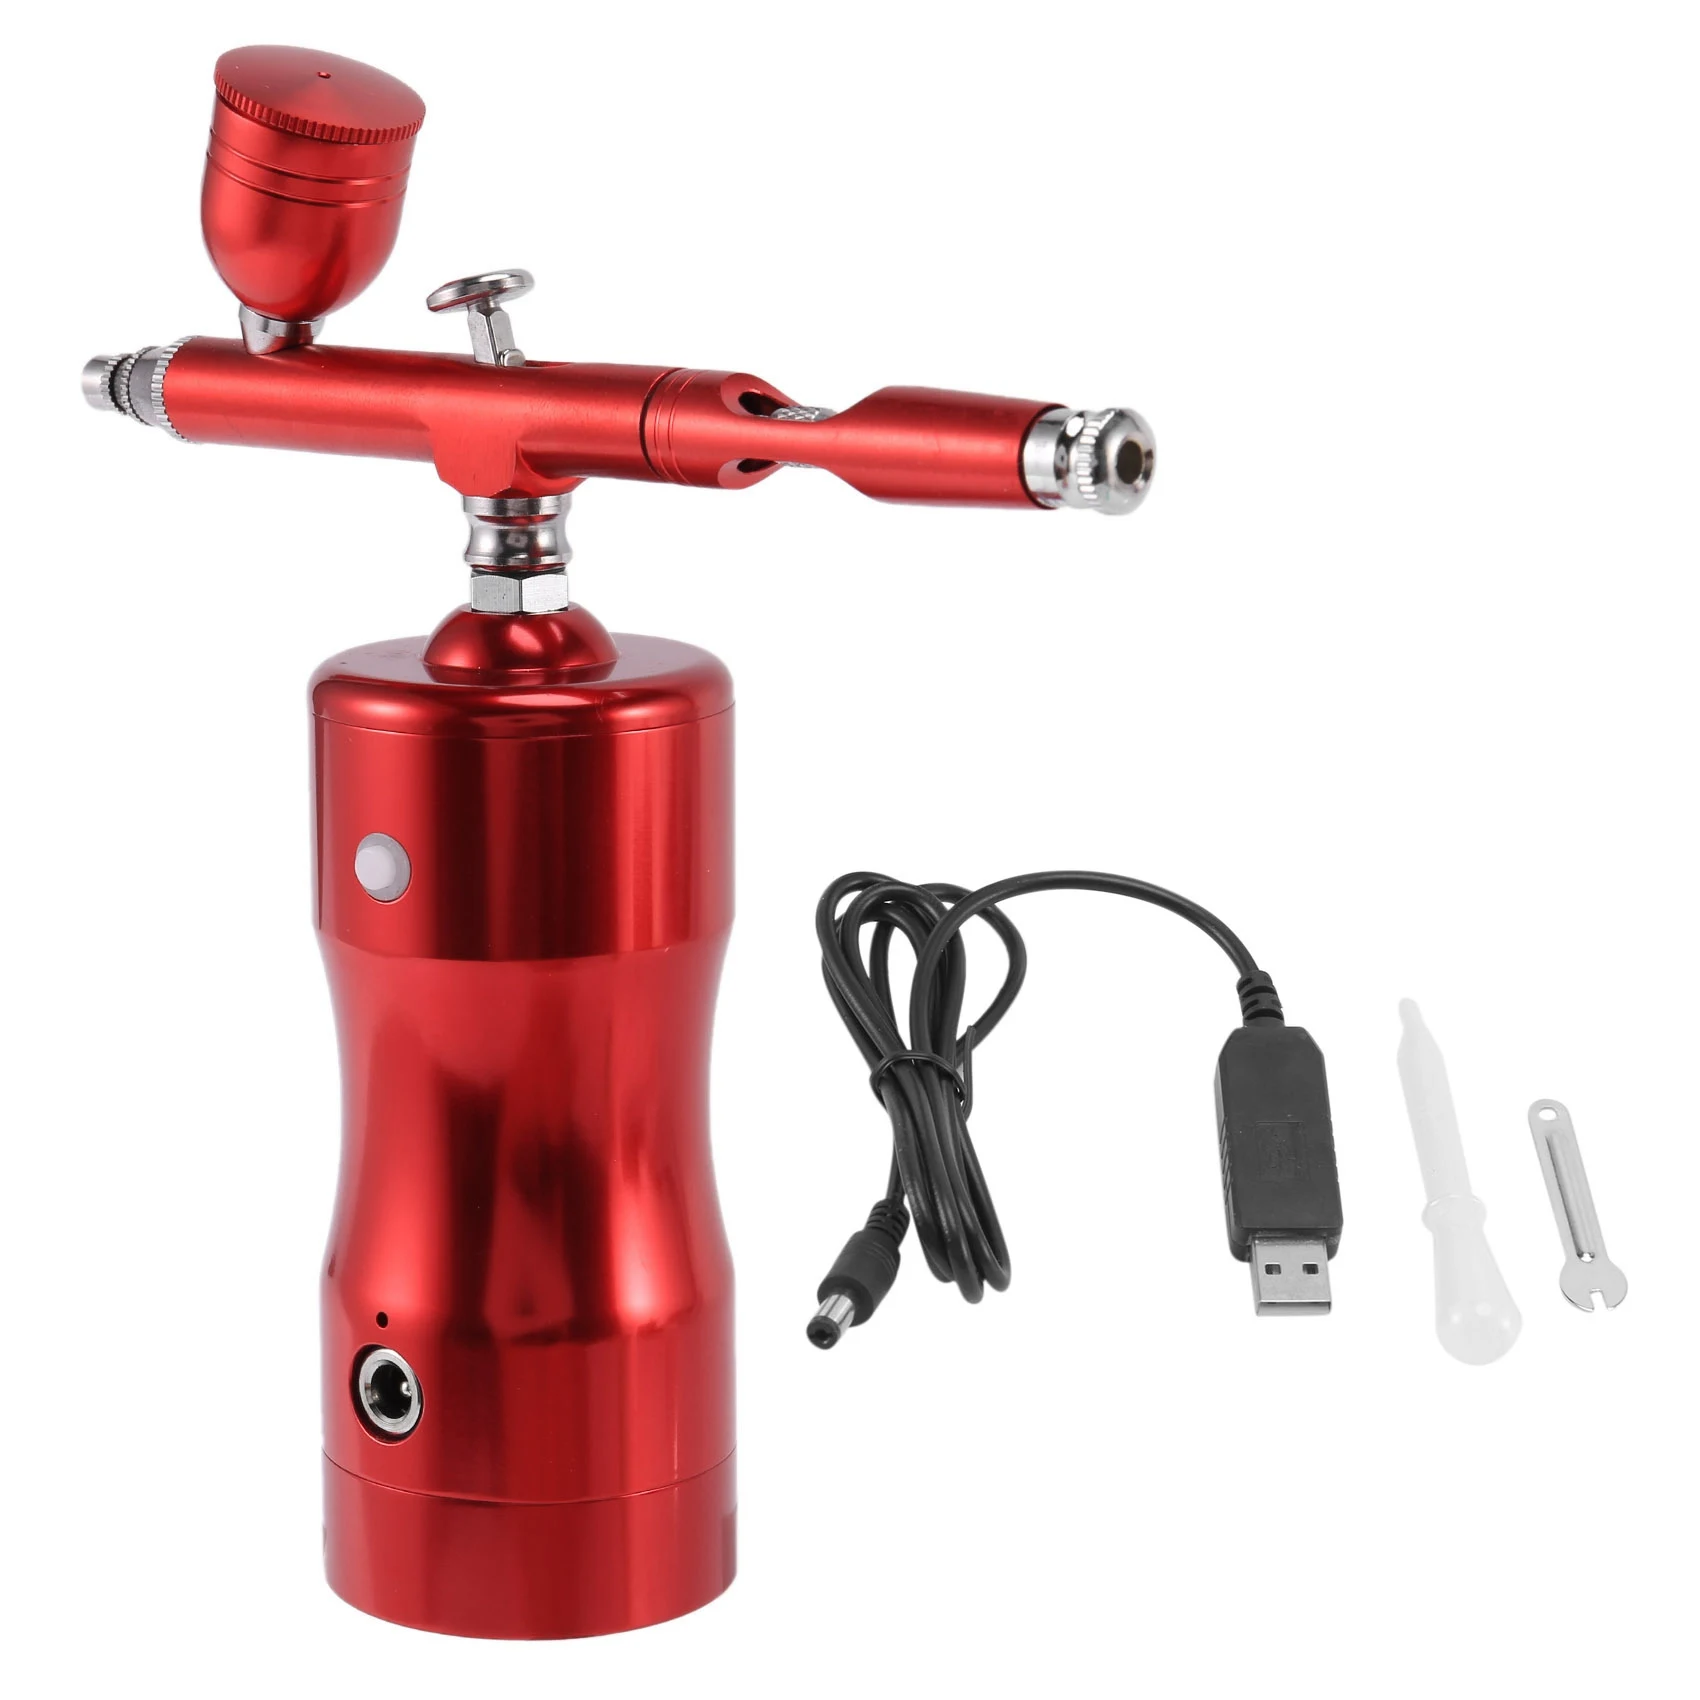 

Auto Airbrush Kit Rechargeable Handheld Mini Air Compressor Airbrush Set with 0.4mm Nozzles Portable Cordless Airbrush with L